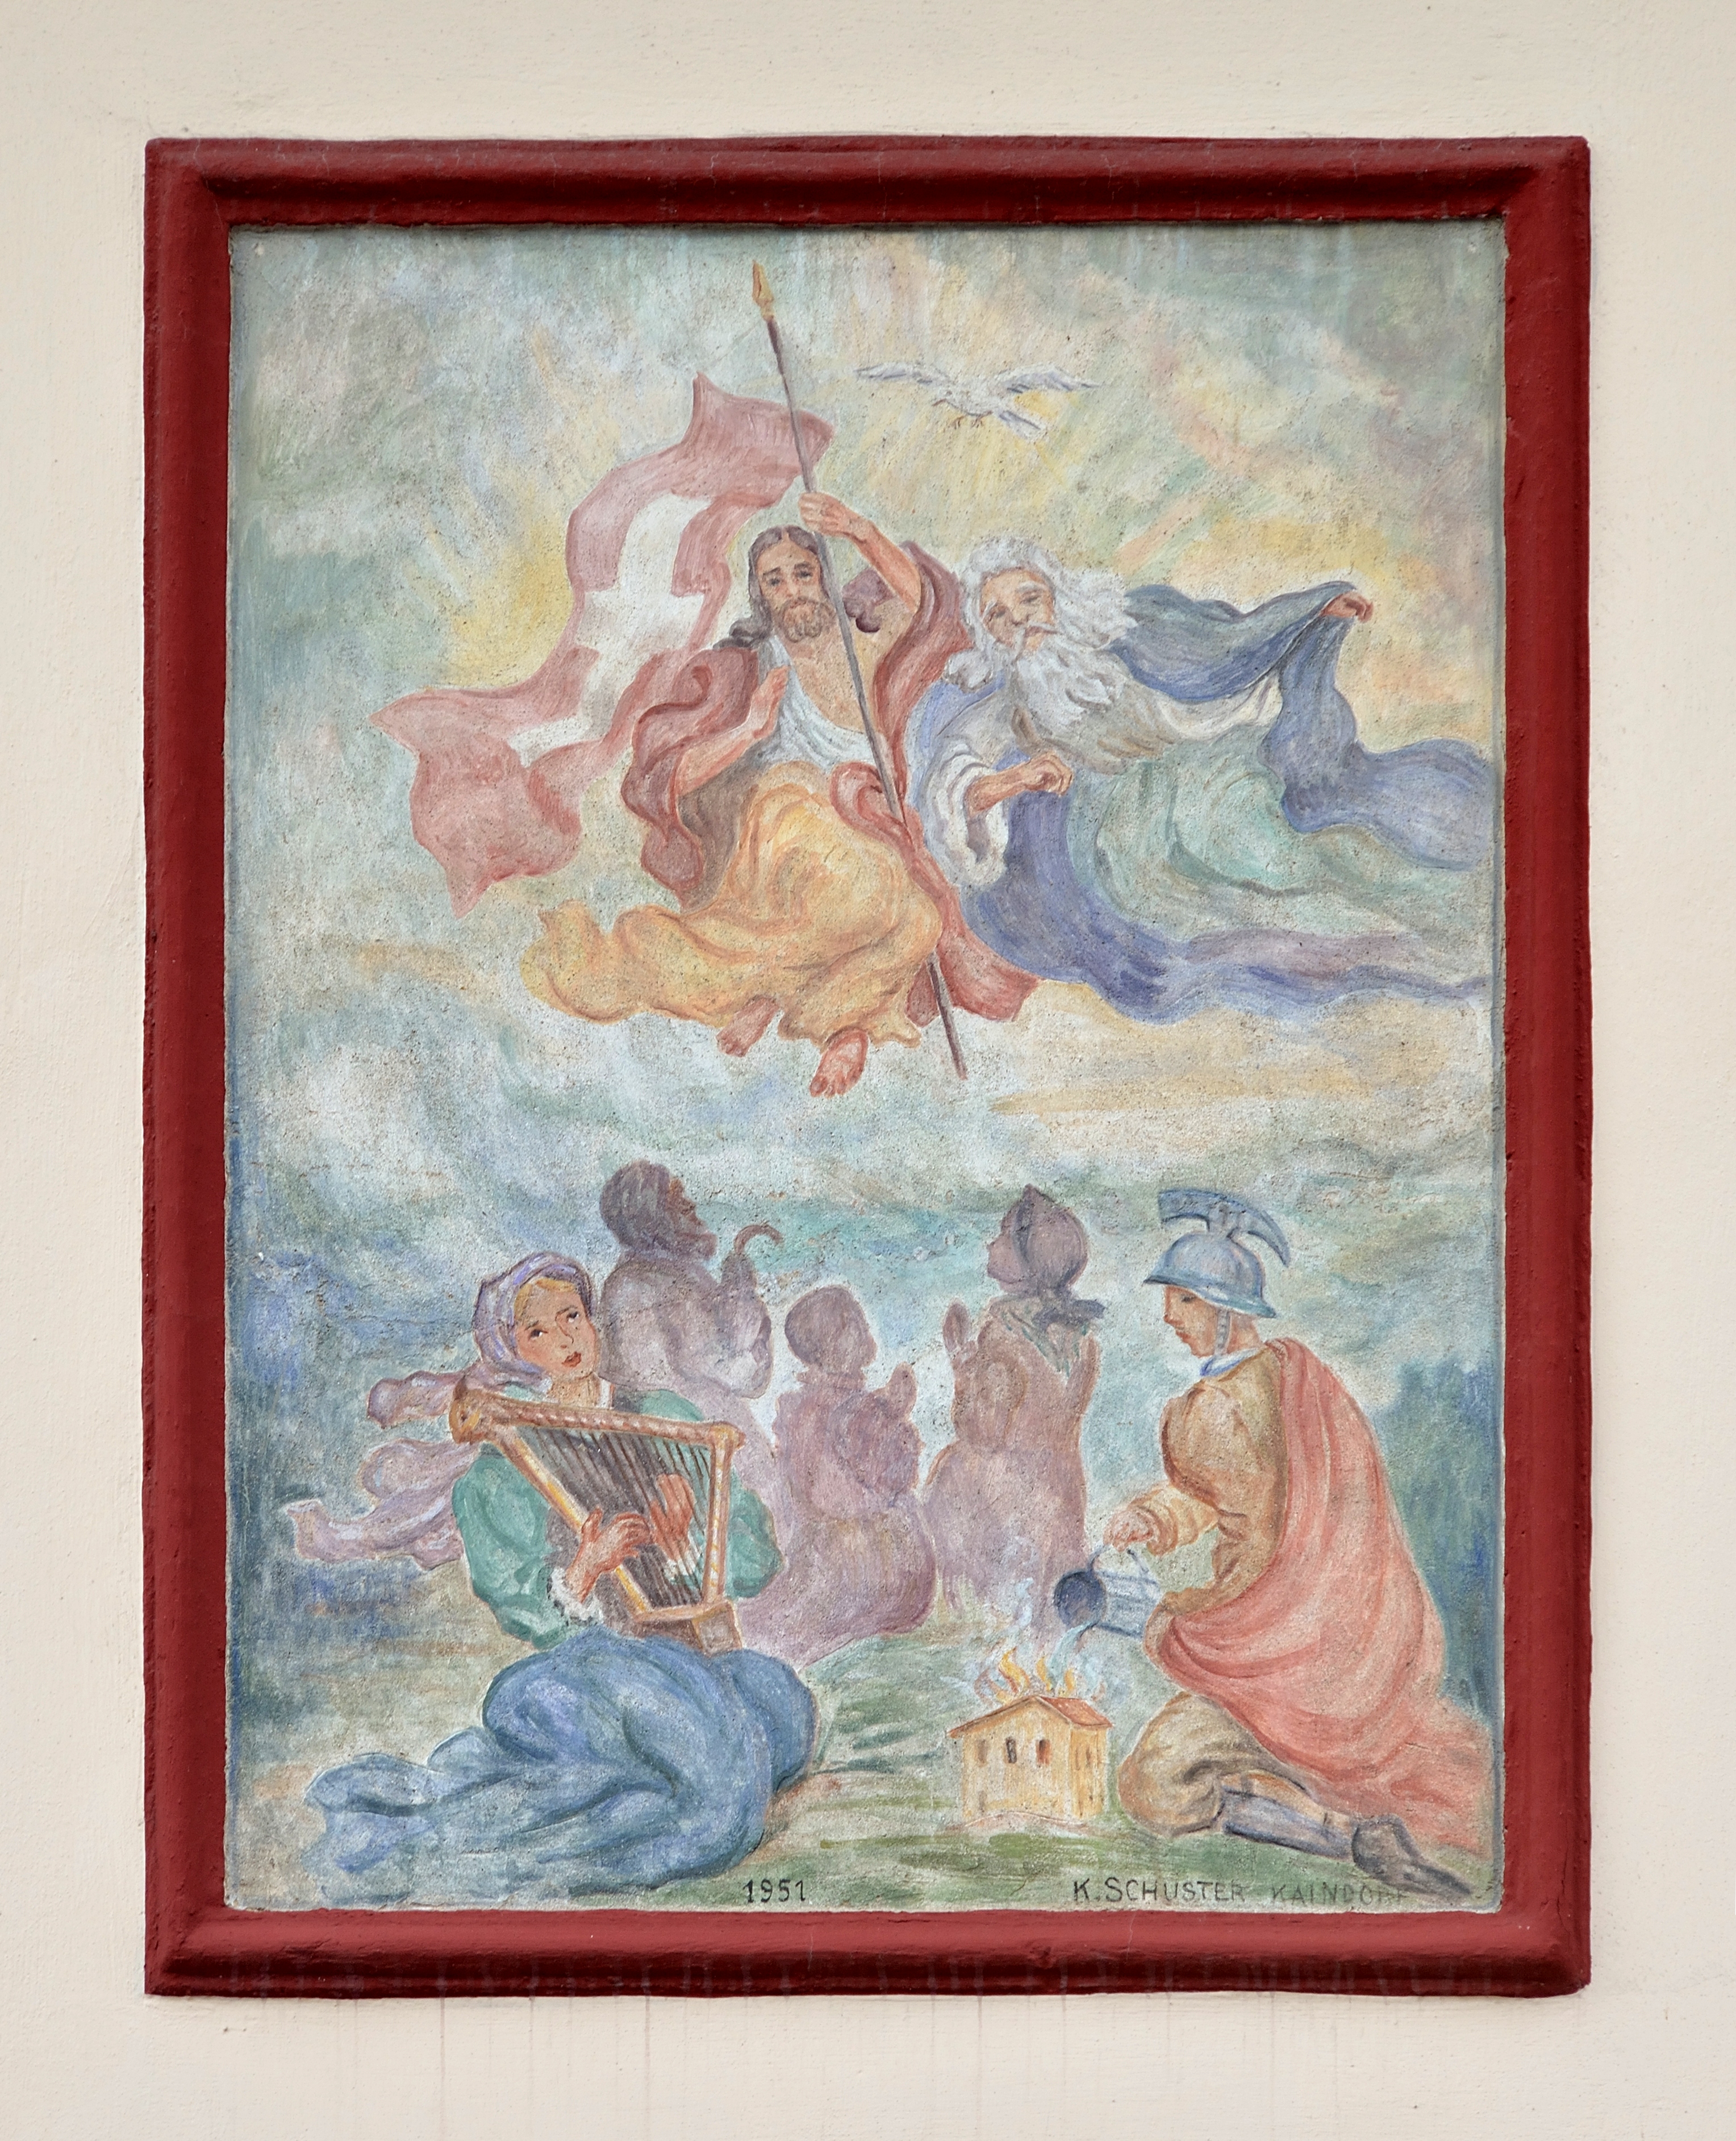 Wall painting of Holy Trinity by K. Schuster, Birkfeld